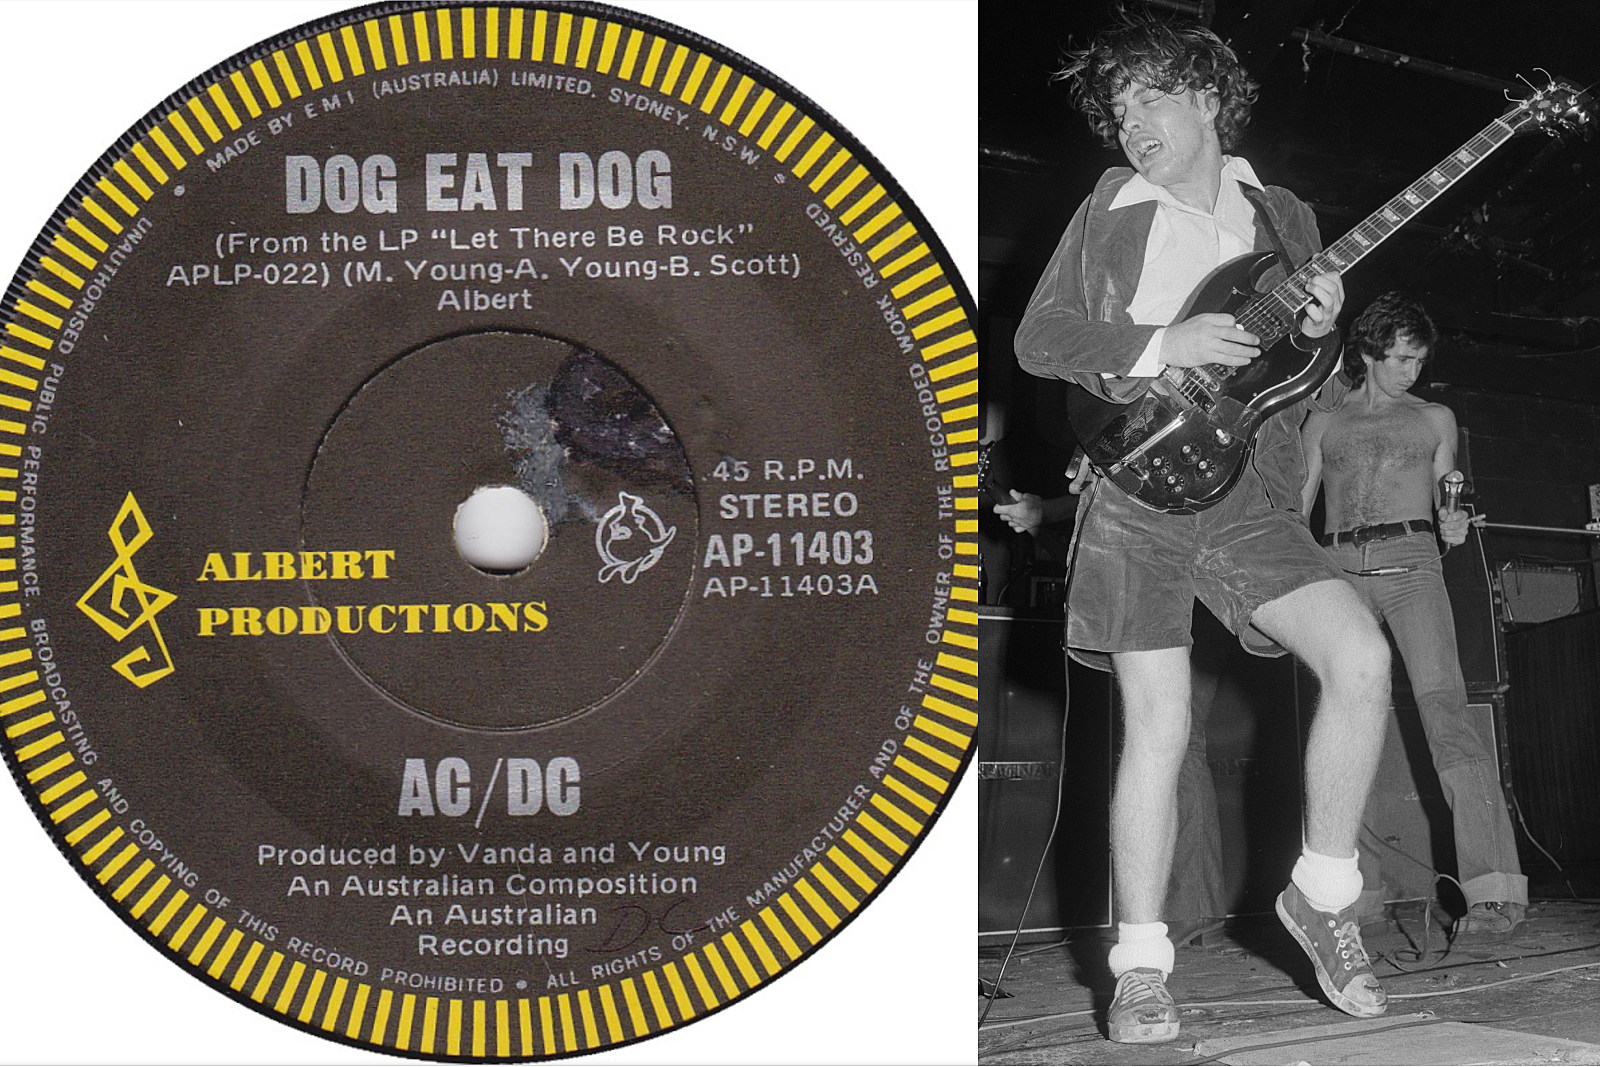 How AC/DC Channeled Record Anger Into 'Dog Eat Dog'